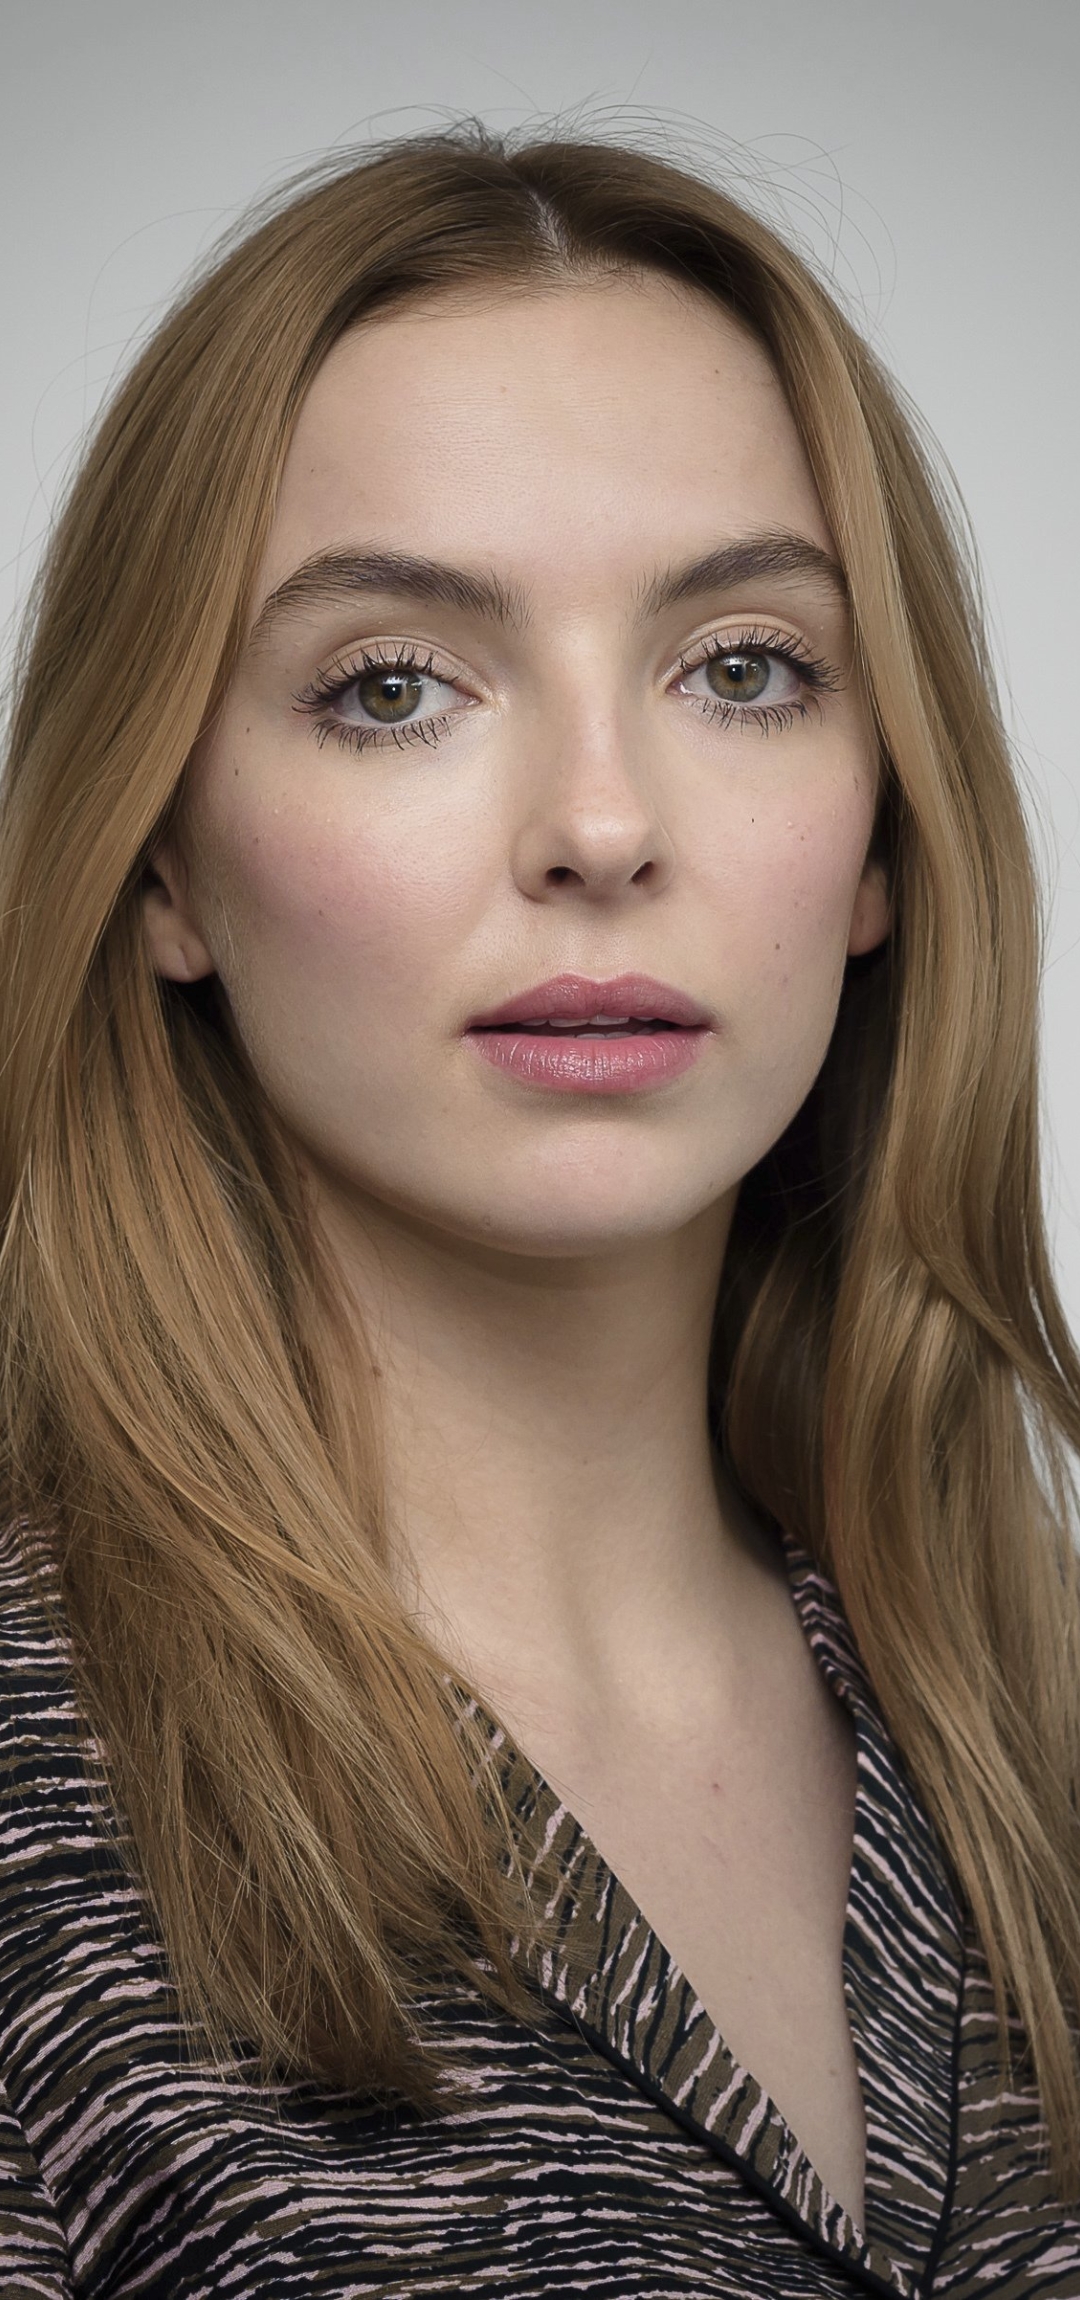 1080x2300 Resolution Jodie Comer Killing Eve Actress 1080x2300 ...